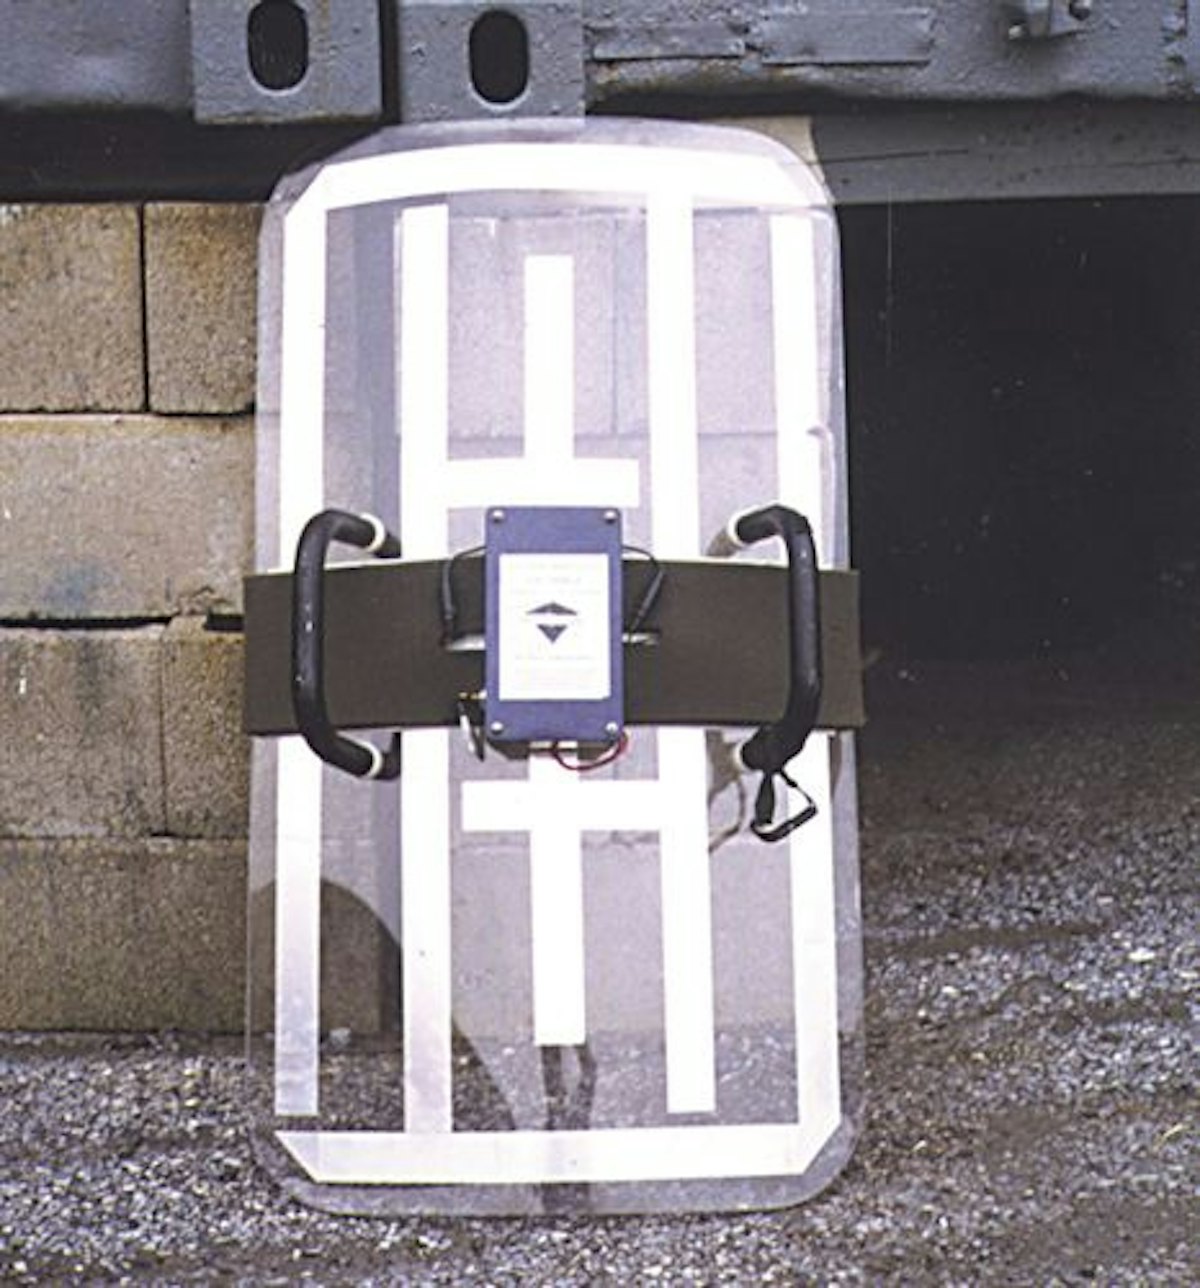 Body Armor - Riot Shields for Riot Police, Corrections  and Cell Extraction